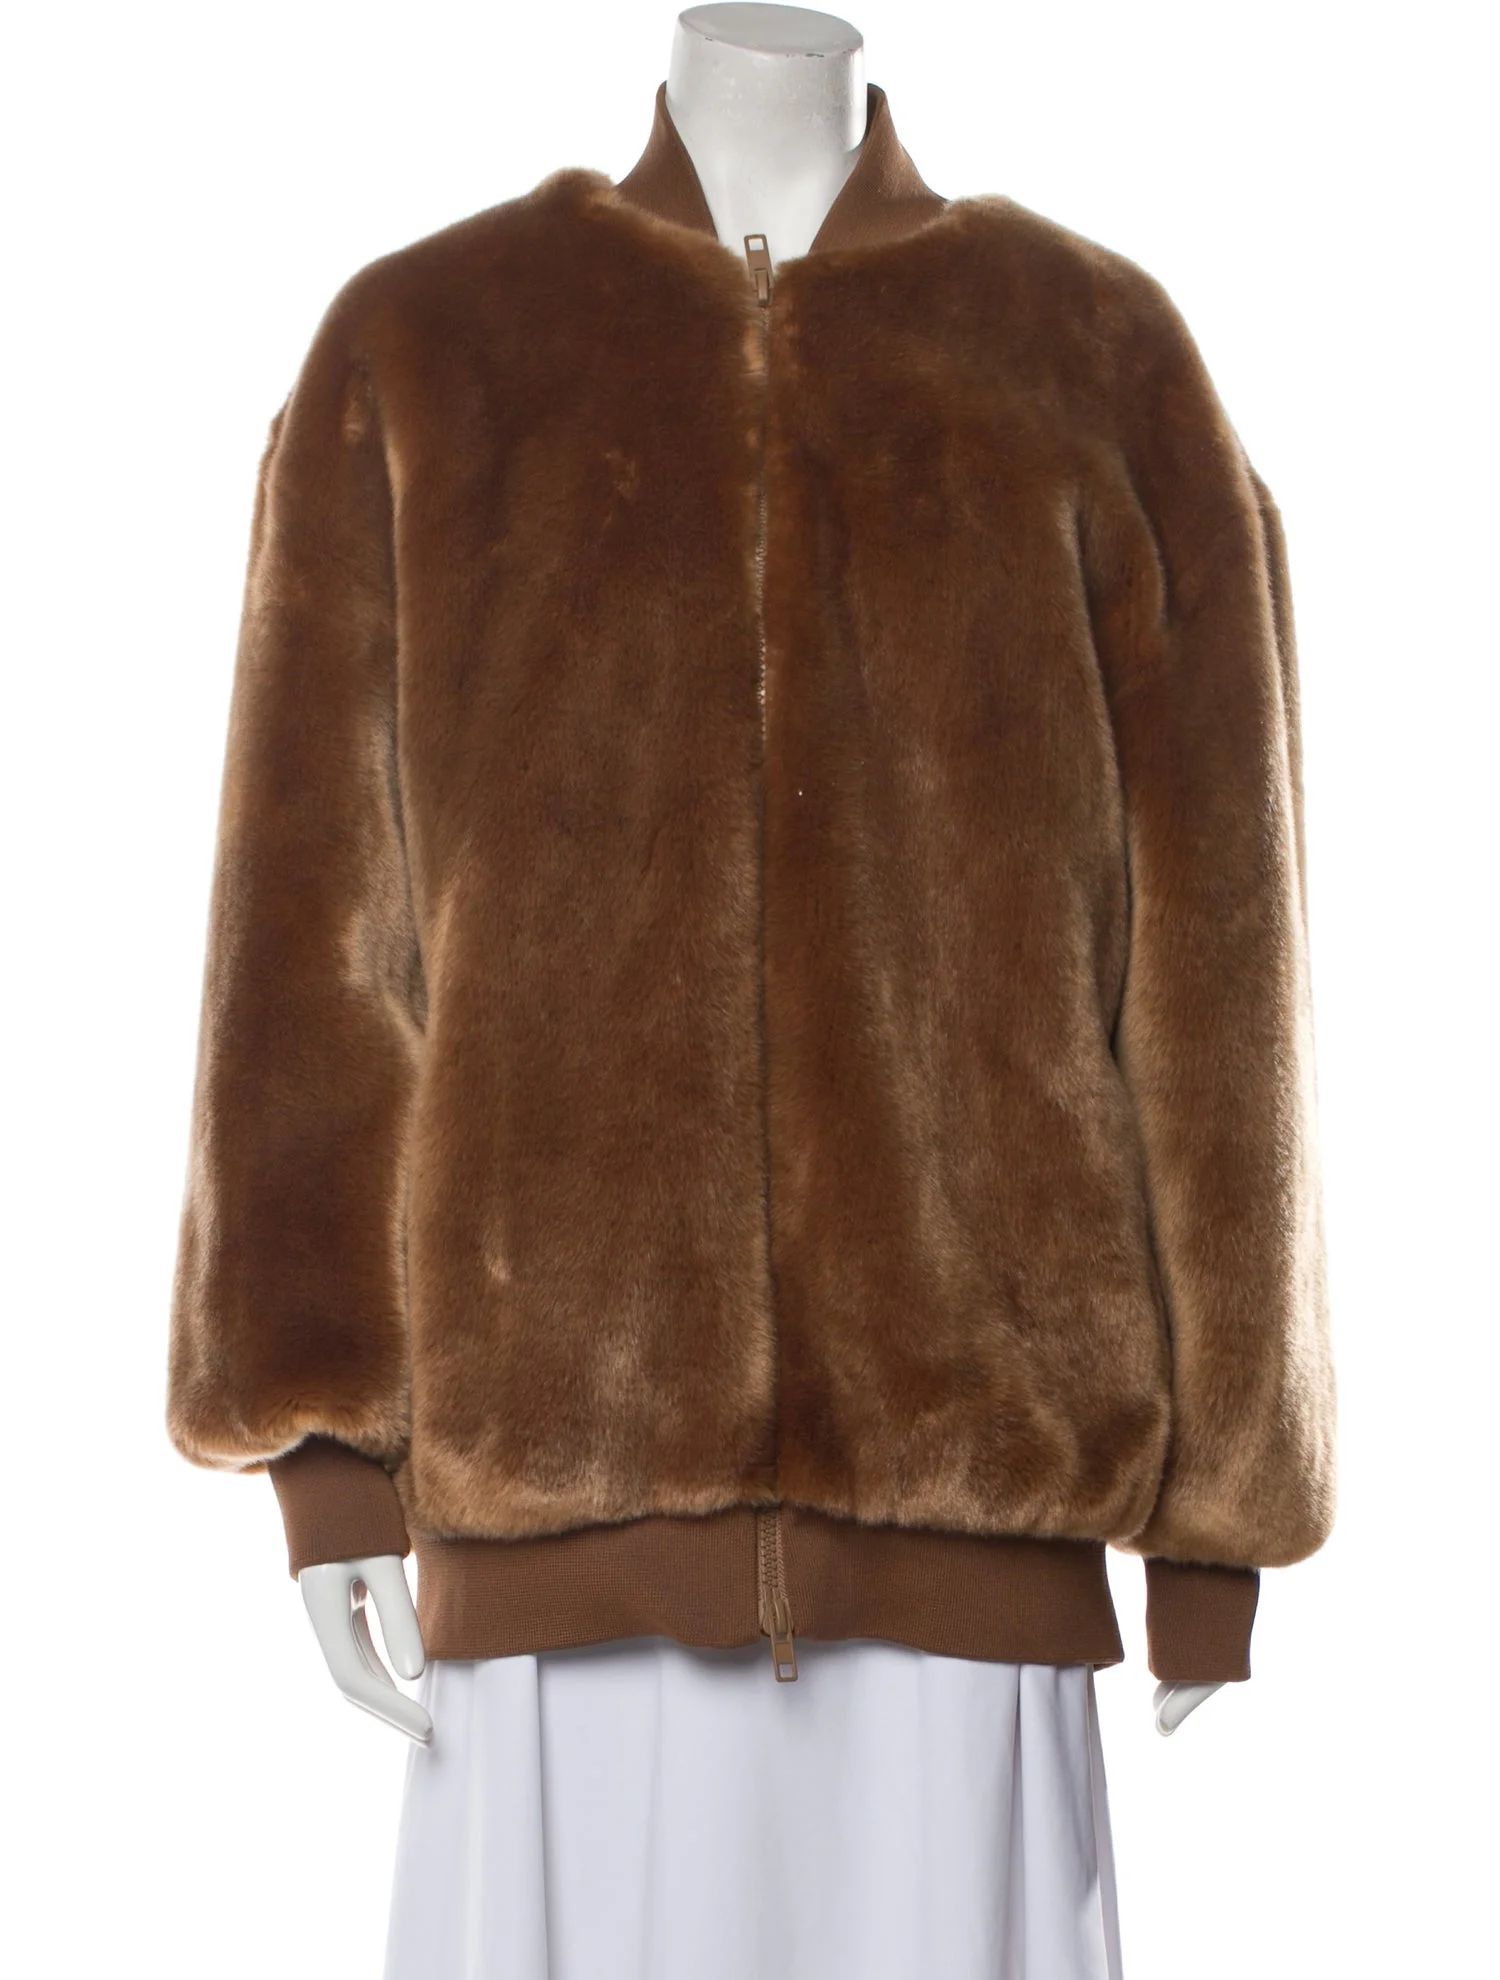 Faux Fur Jacket | The RealReal